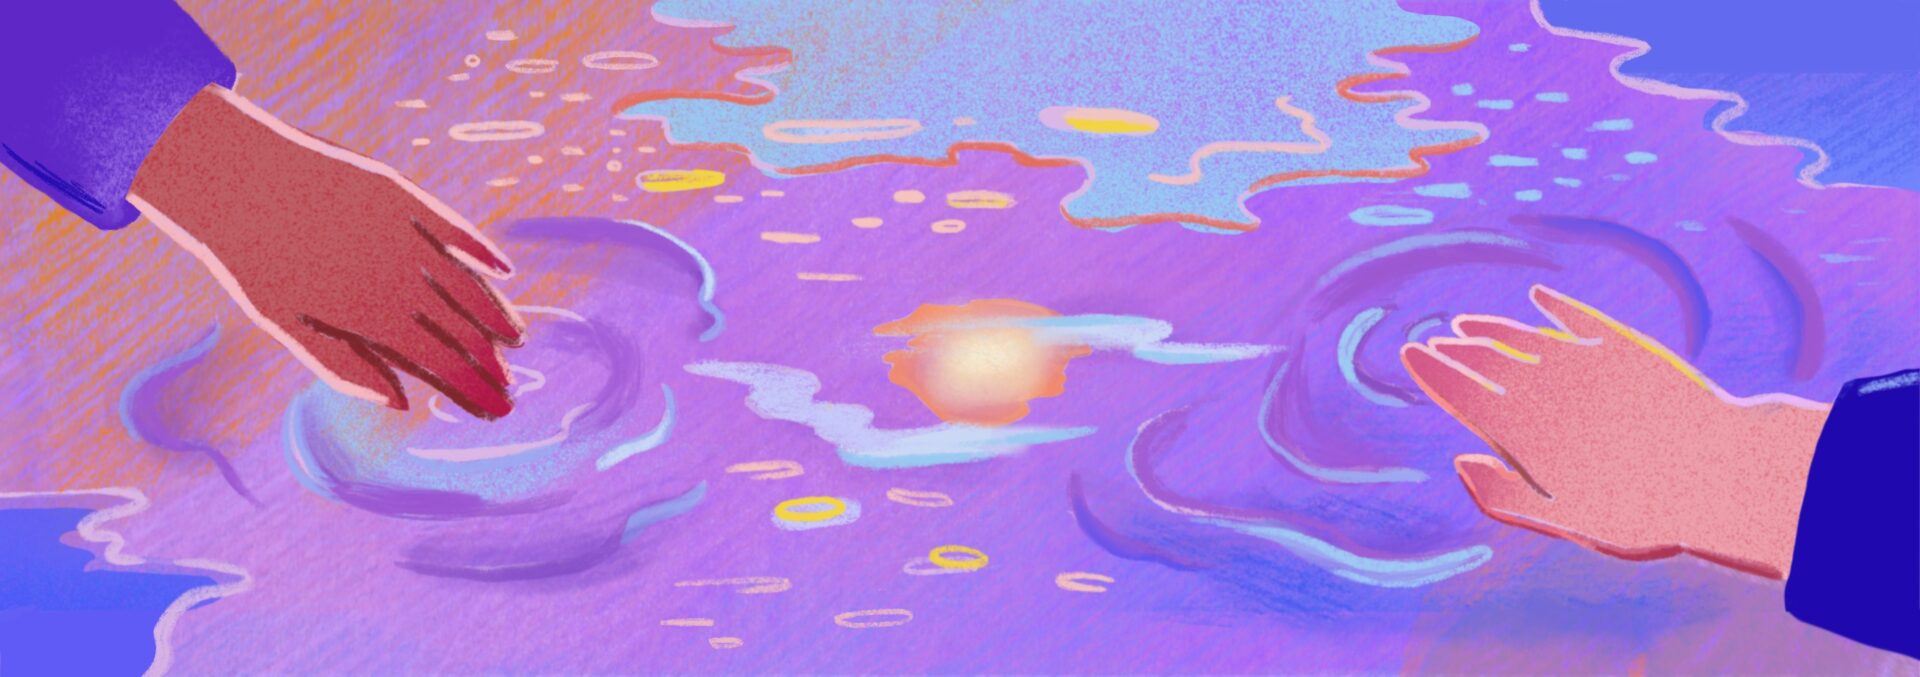 The illustration shows two hands on either side of the image reaching into a pool of water to create ripples. The water is reflecting the oranges and yellows of the sky onto water filled with blues and purples. Ripples surround each of the hands.